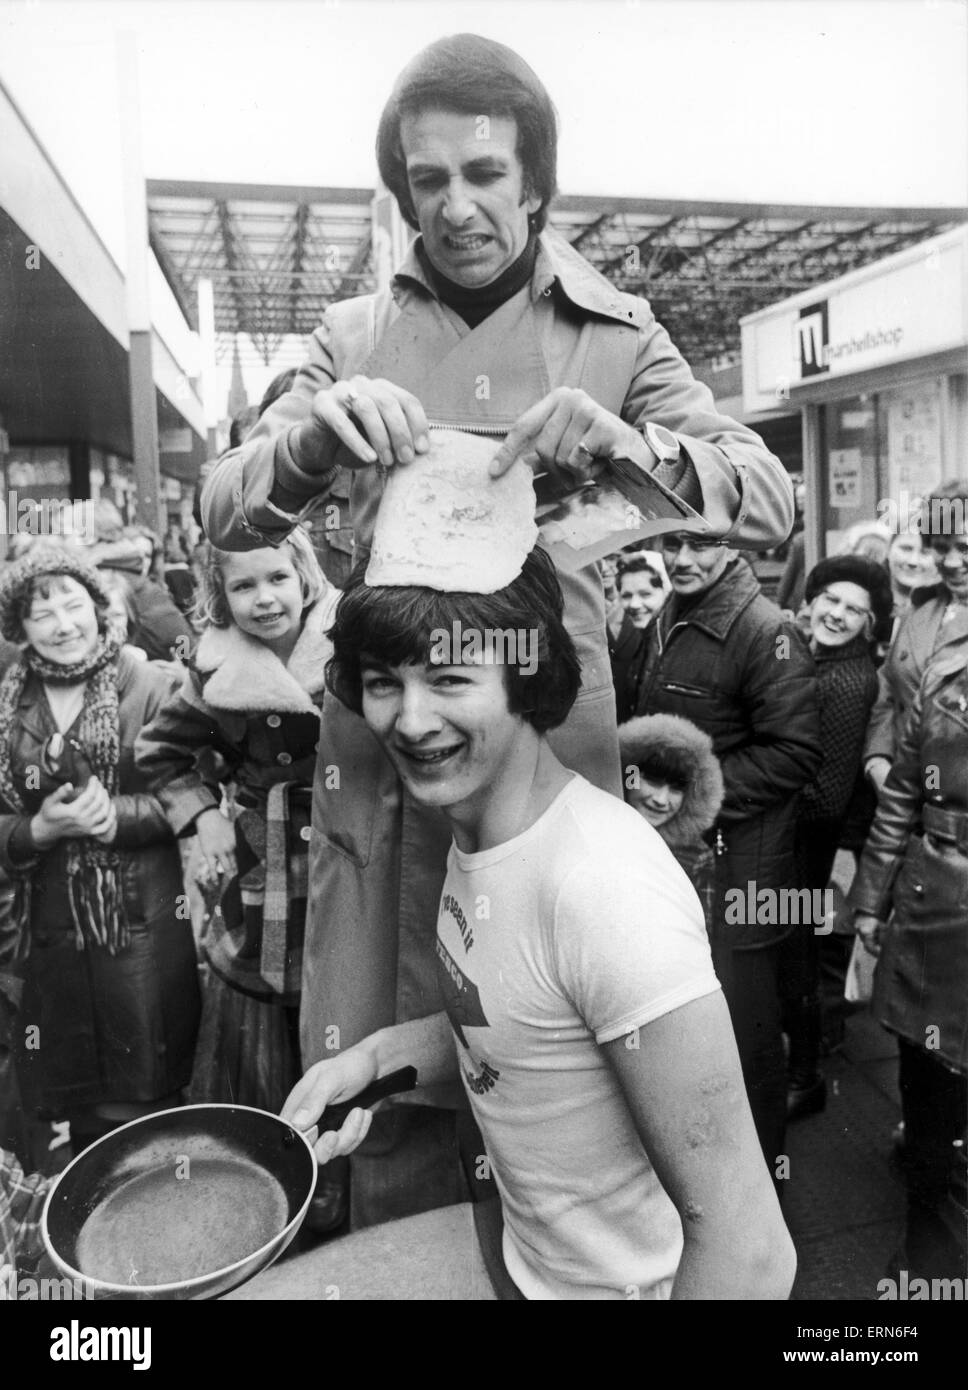 Paul Irvine, trainee manager at Tesco's, found himself trying his pancake as a hat when Birmingham comedian and actor Don Maclean presented him with his prize for winning the mens Pancake Race, Sandwell Mail, Birmingham, 22nd February 1977. Stock Photo